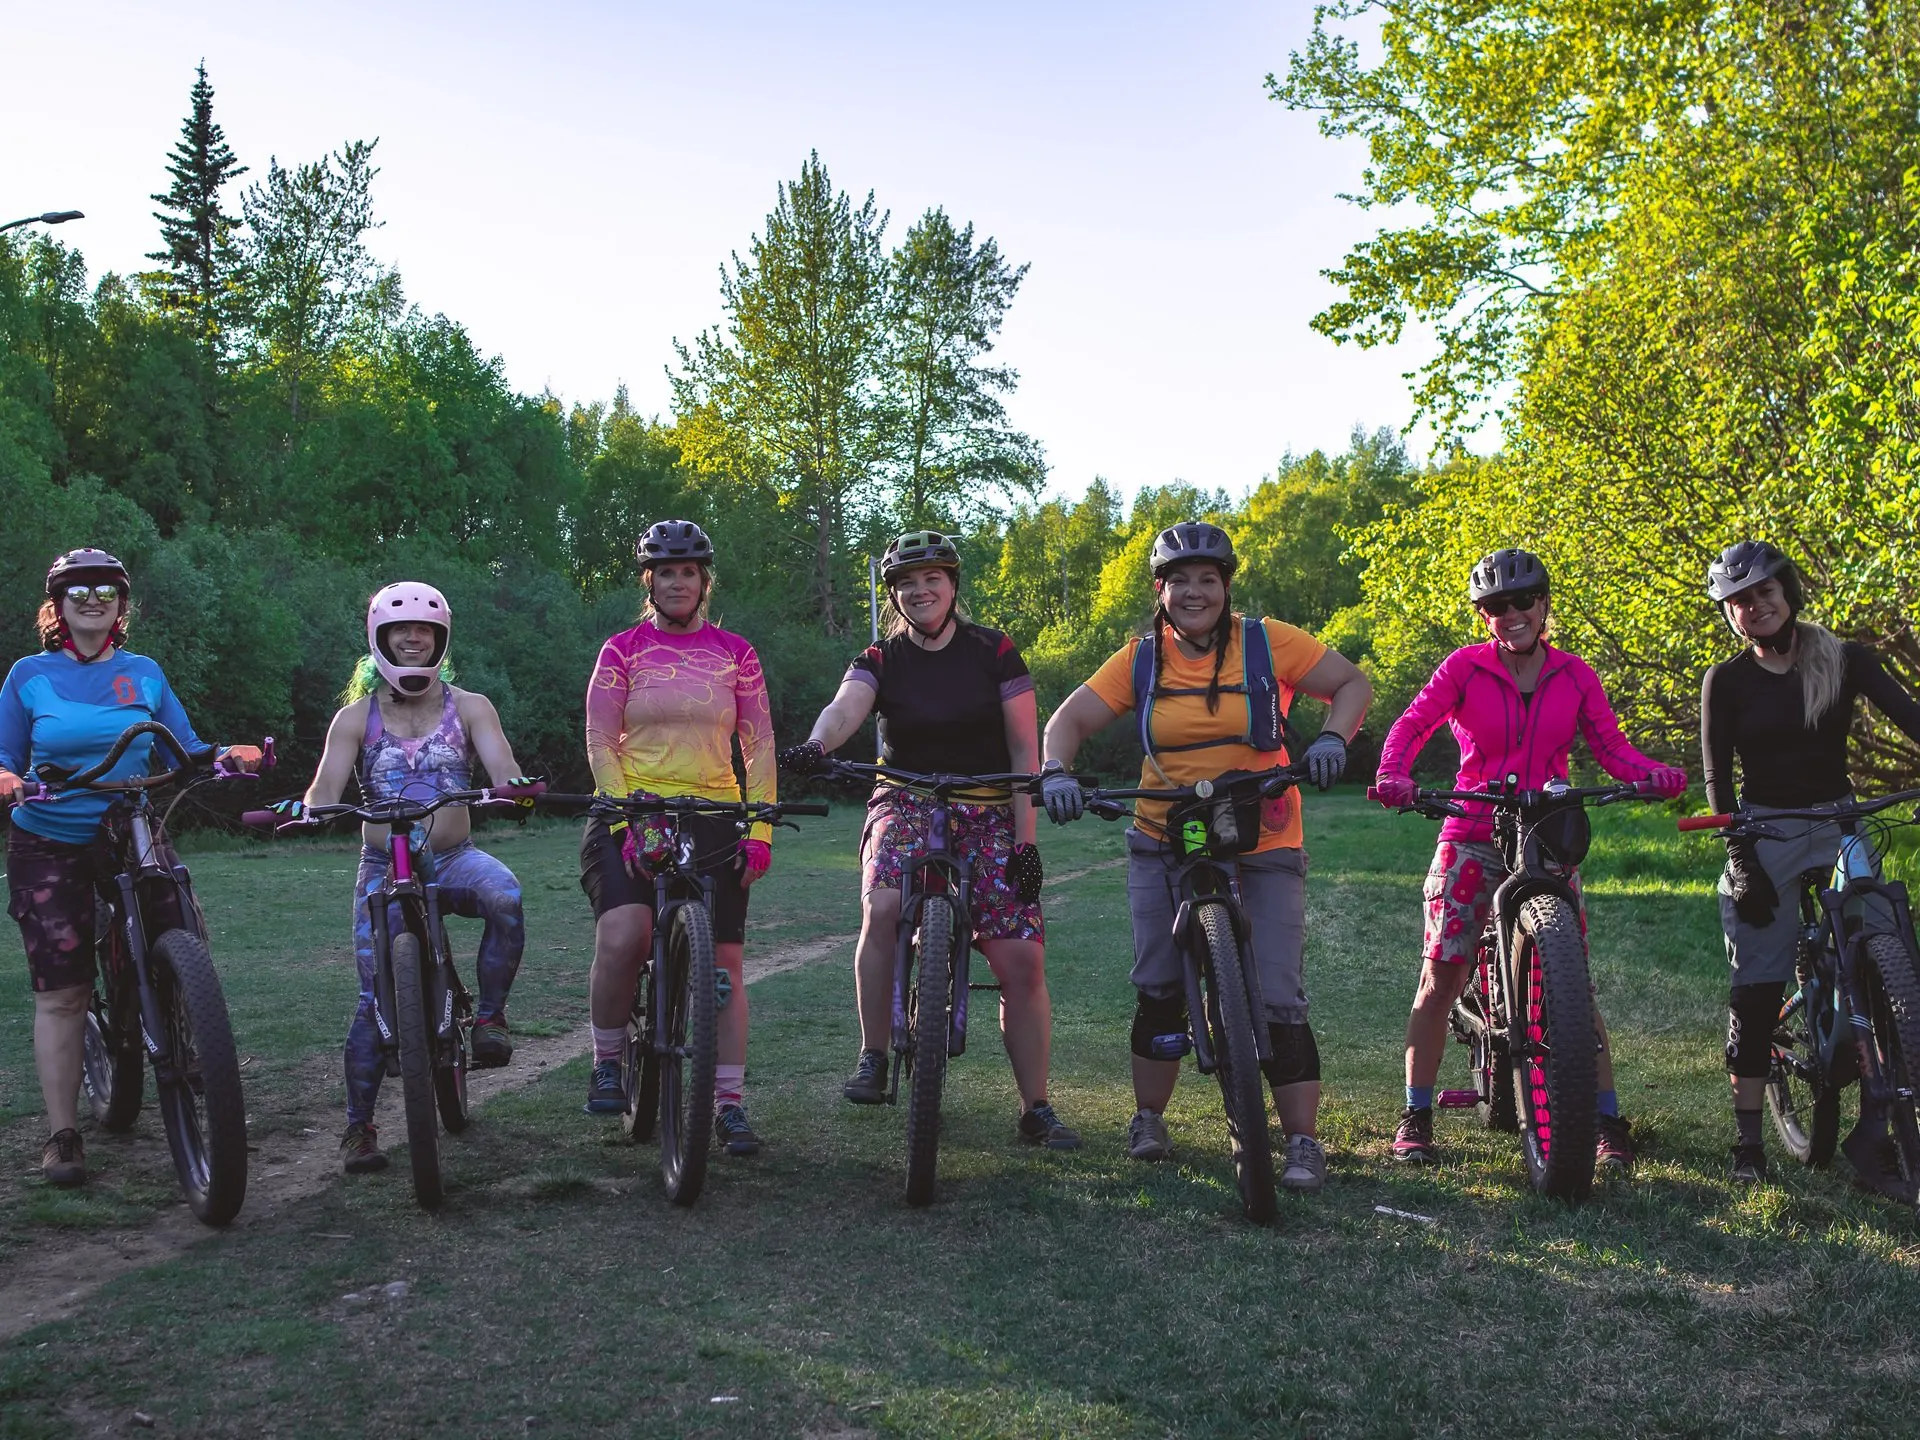 a group of women pose on bikes